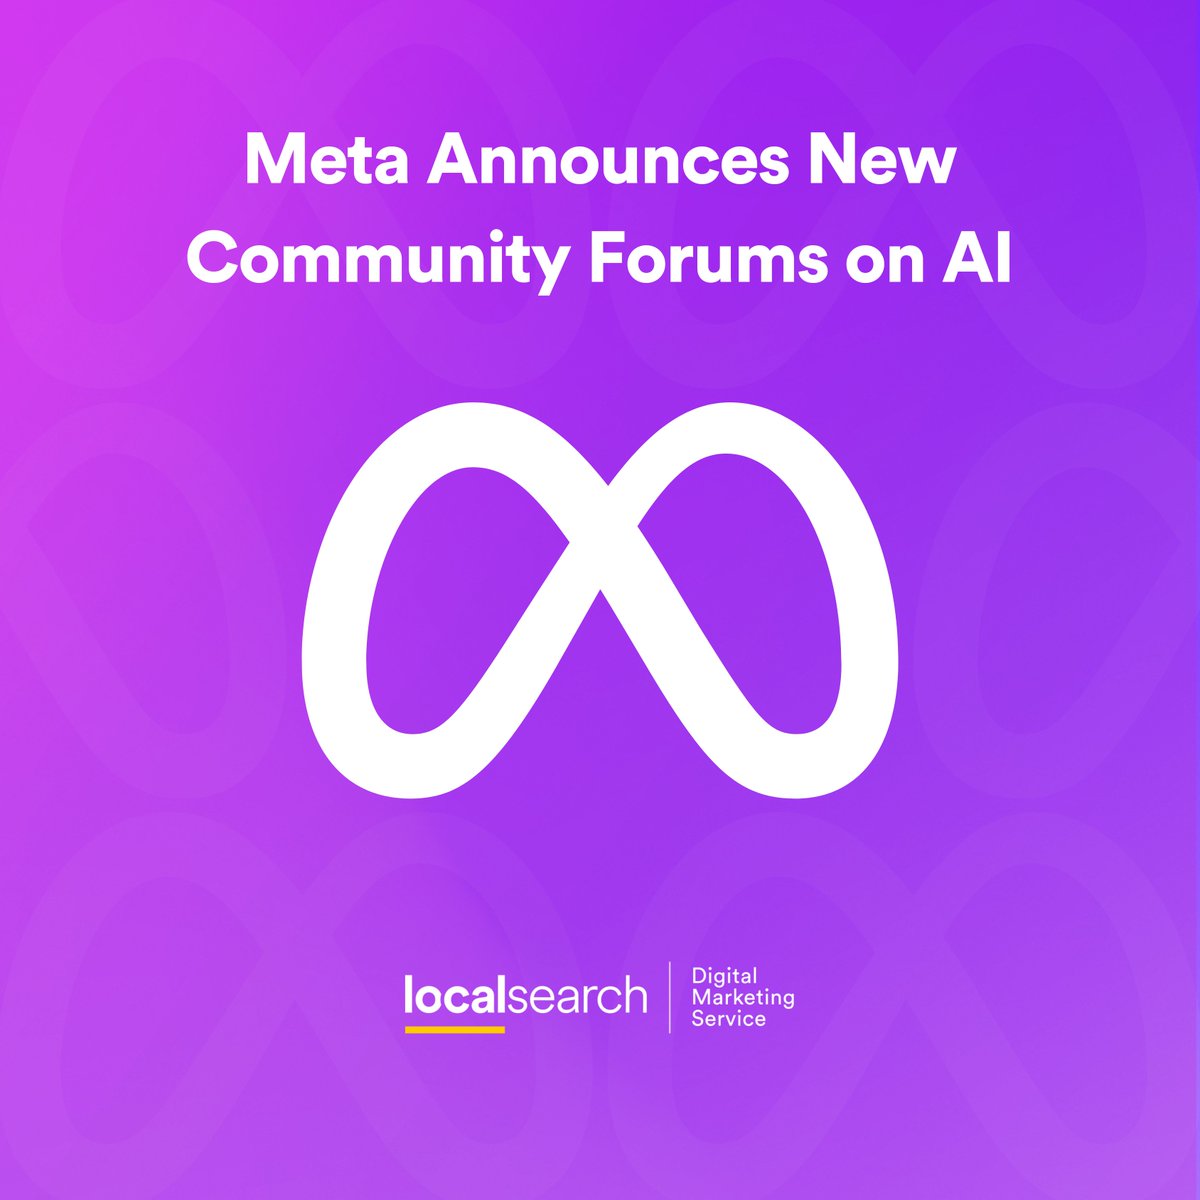 @Meta is launching a new ’Community Forum on Generative AI’, which will see Meta host a range of public sessions designed to gather feedback on the principles people want to see reflected in new AI technologies.

#SocialMediaMarketing #AI